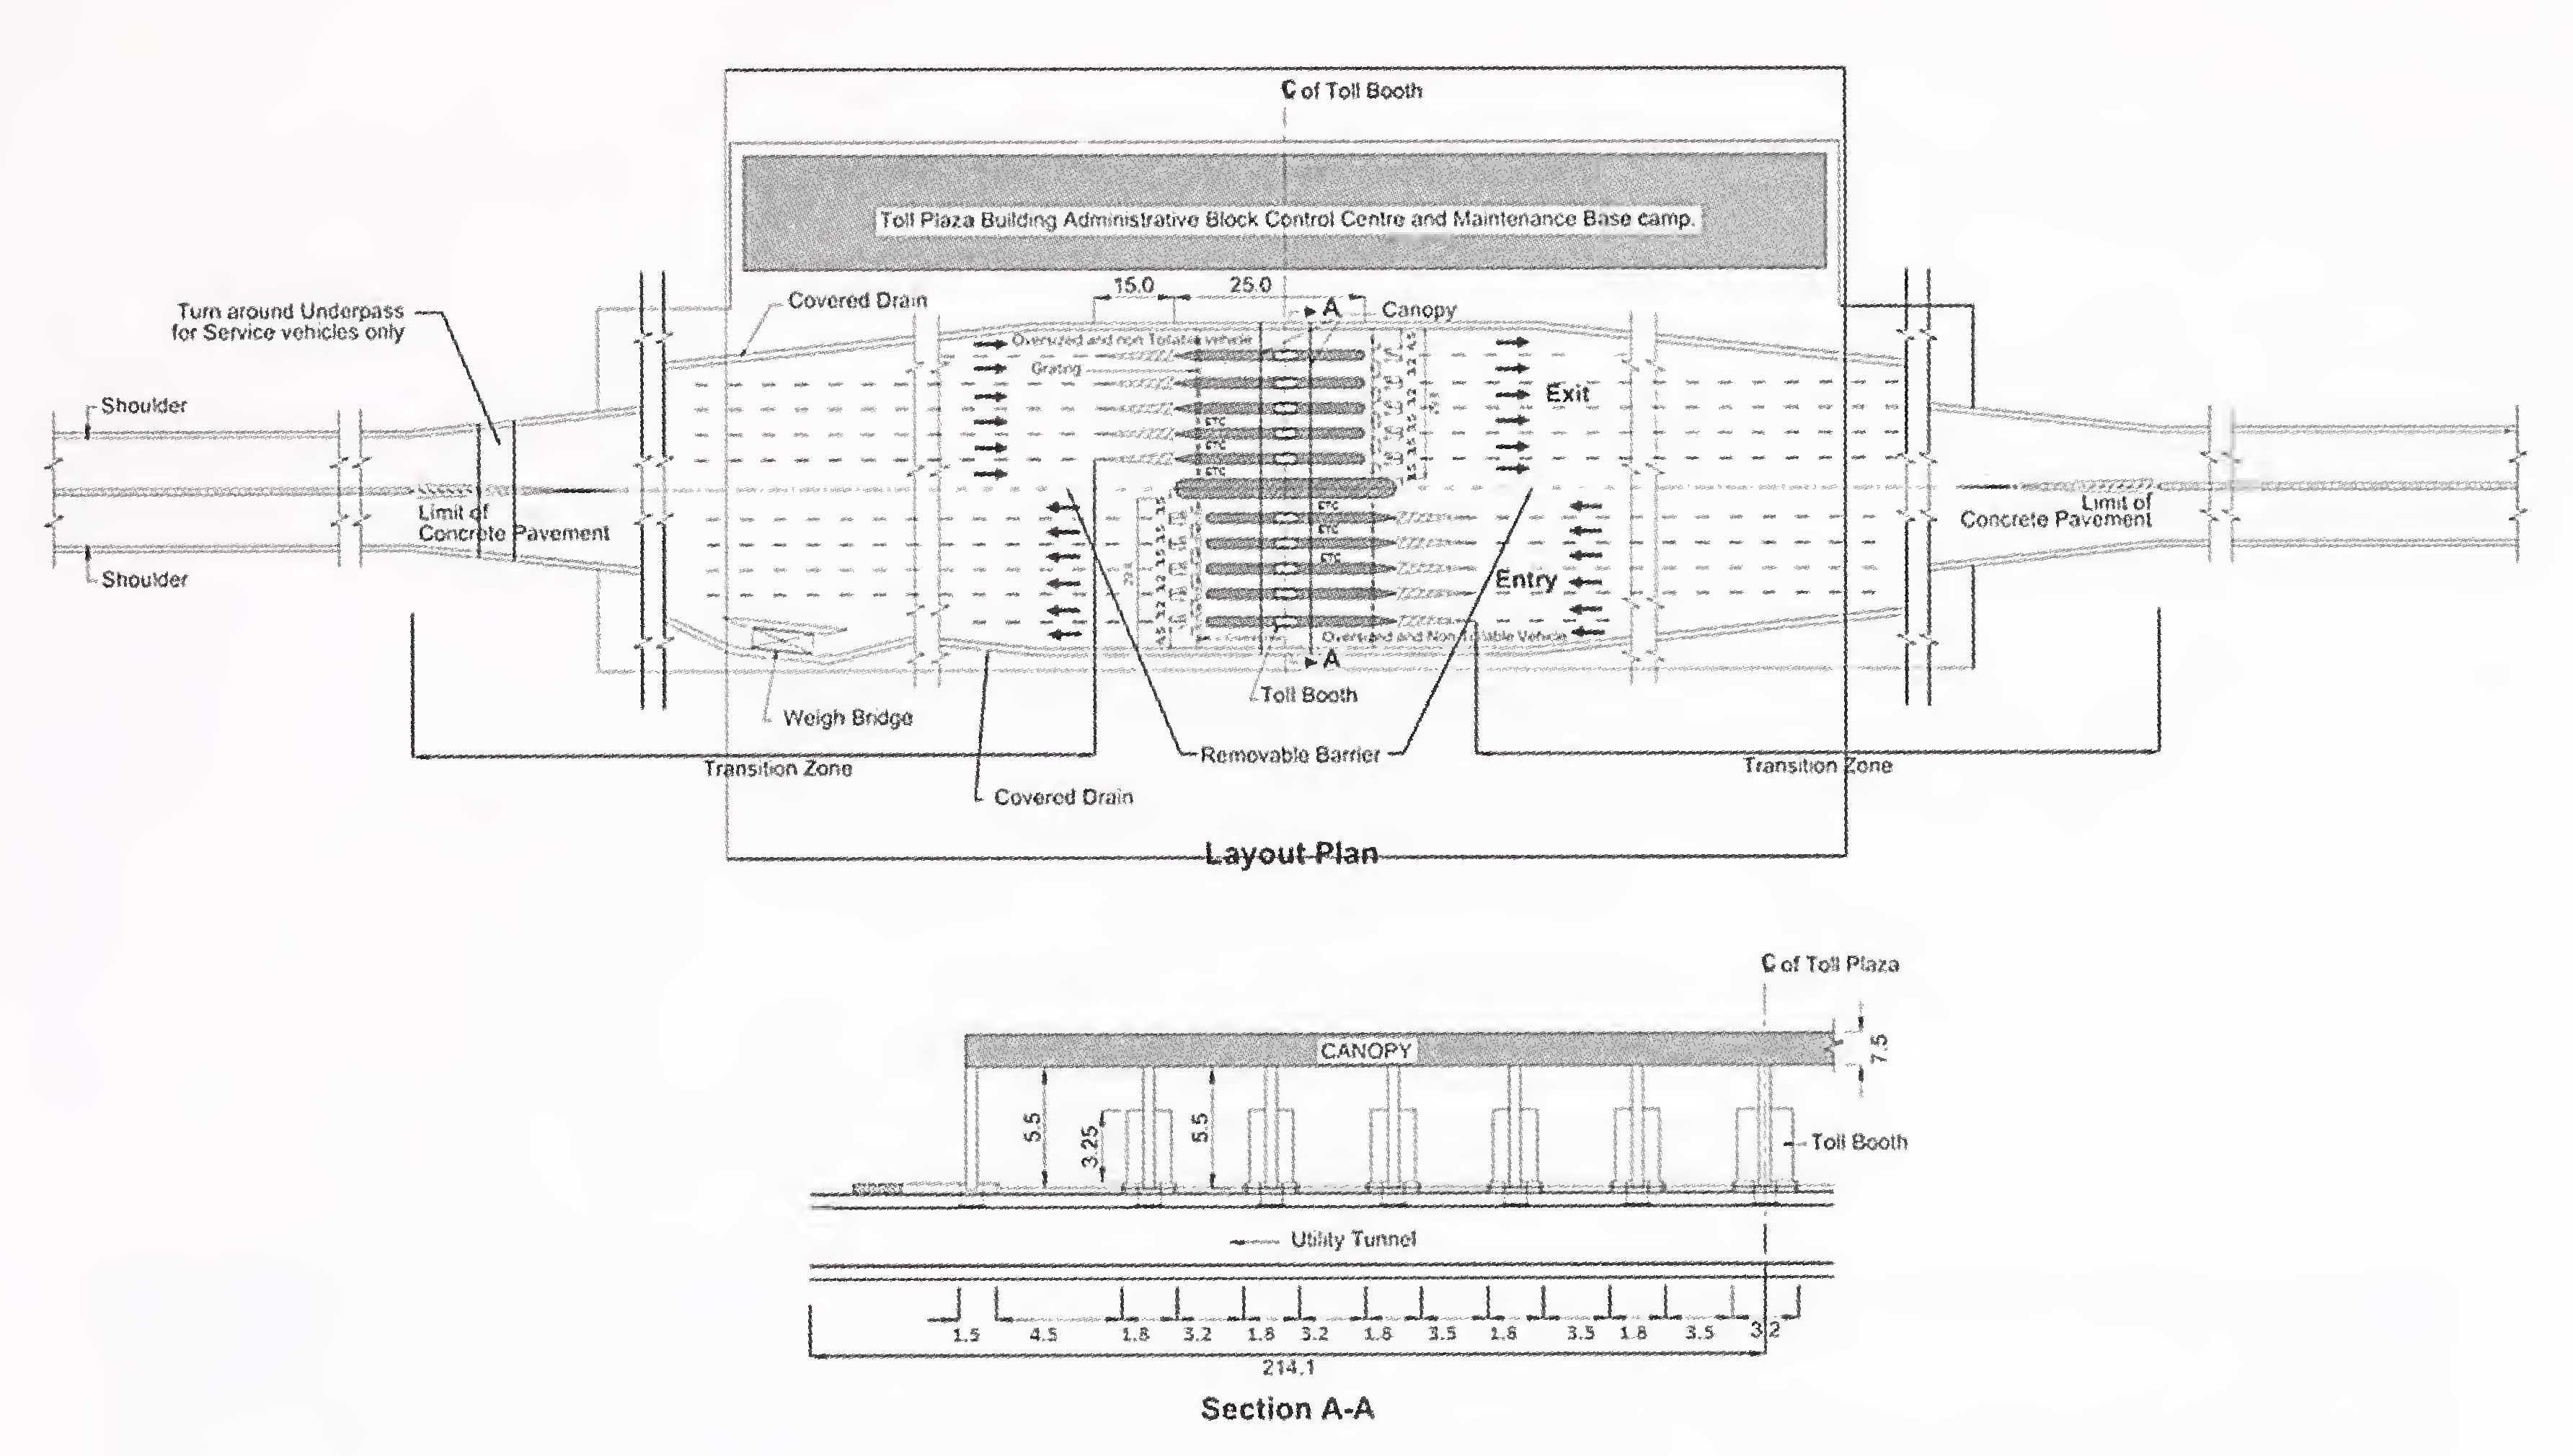 Fig. 12.3 Typical Layout of Toll Plaza